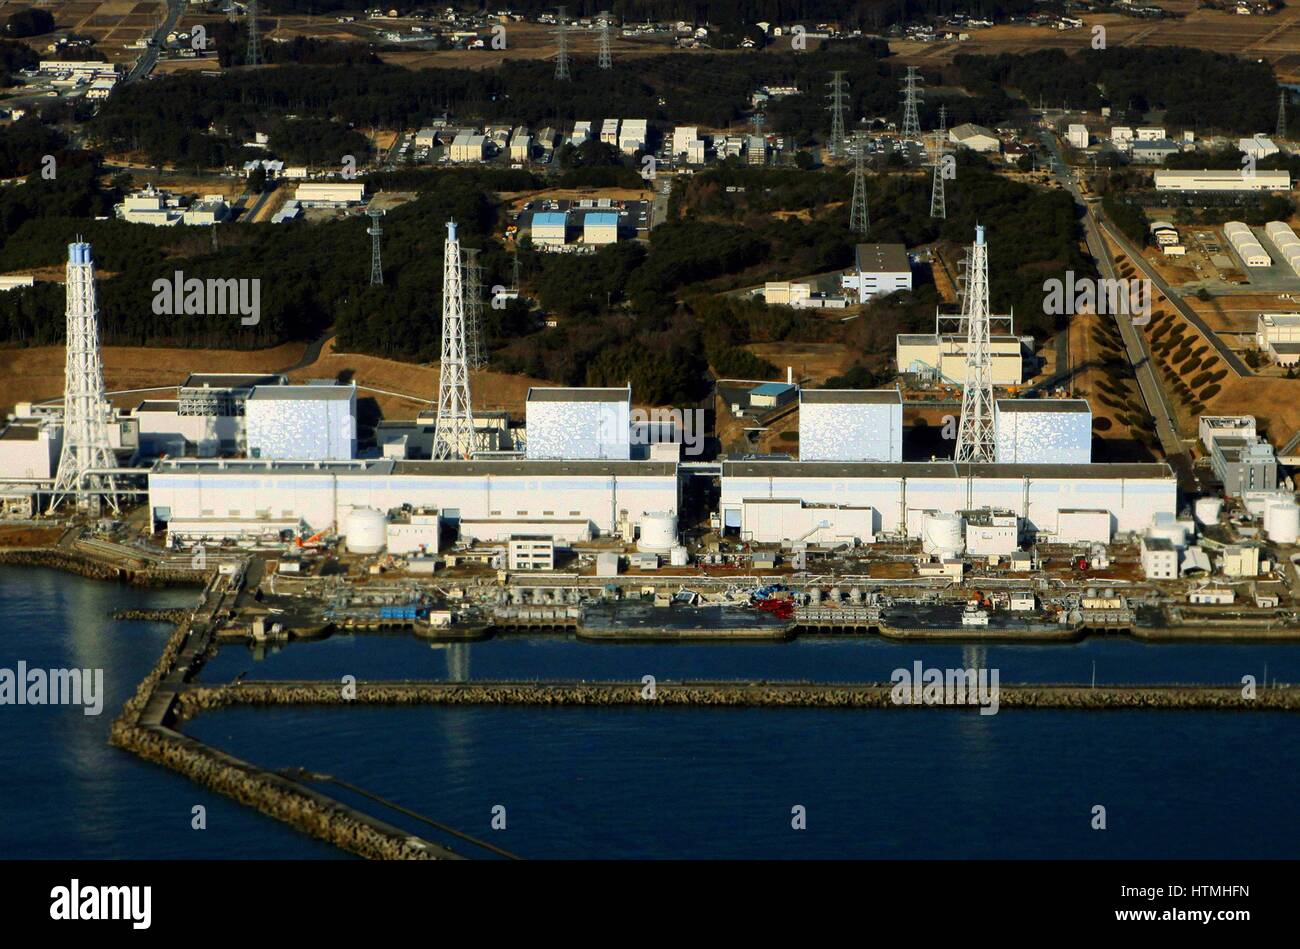 Fukushima Daiichi reactor in North eastern Japan 2011 before the earthquake damage to the reactors march 2011 Stock Photo